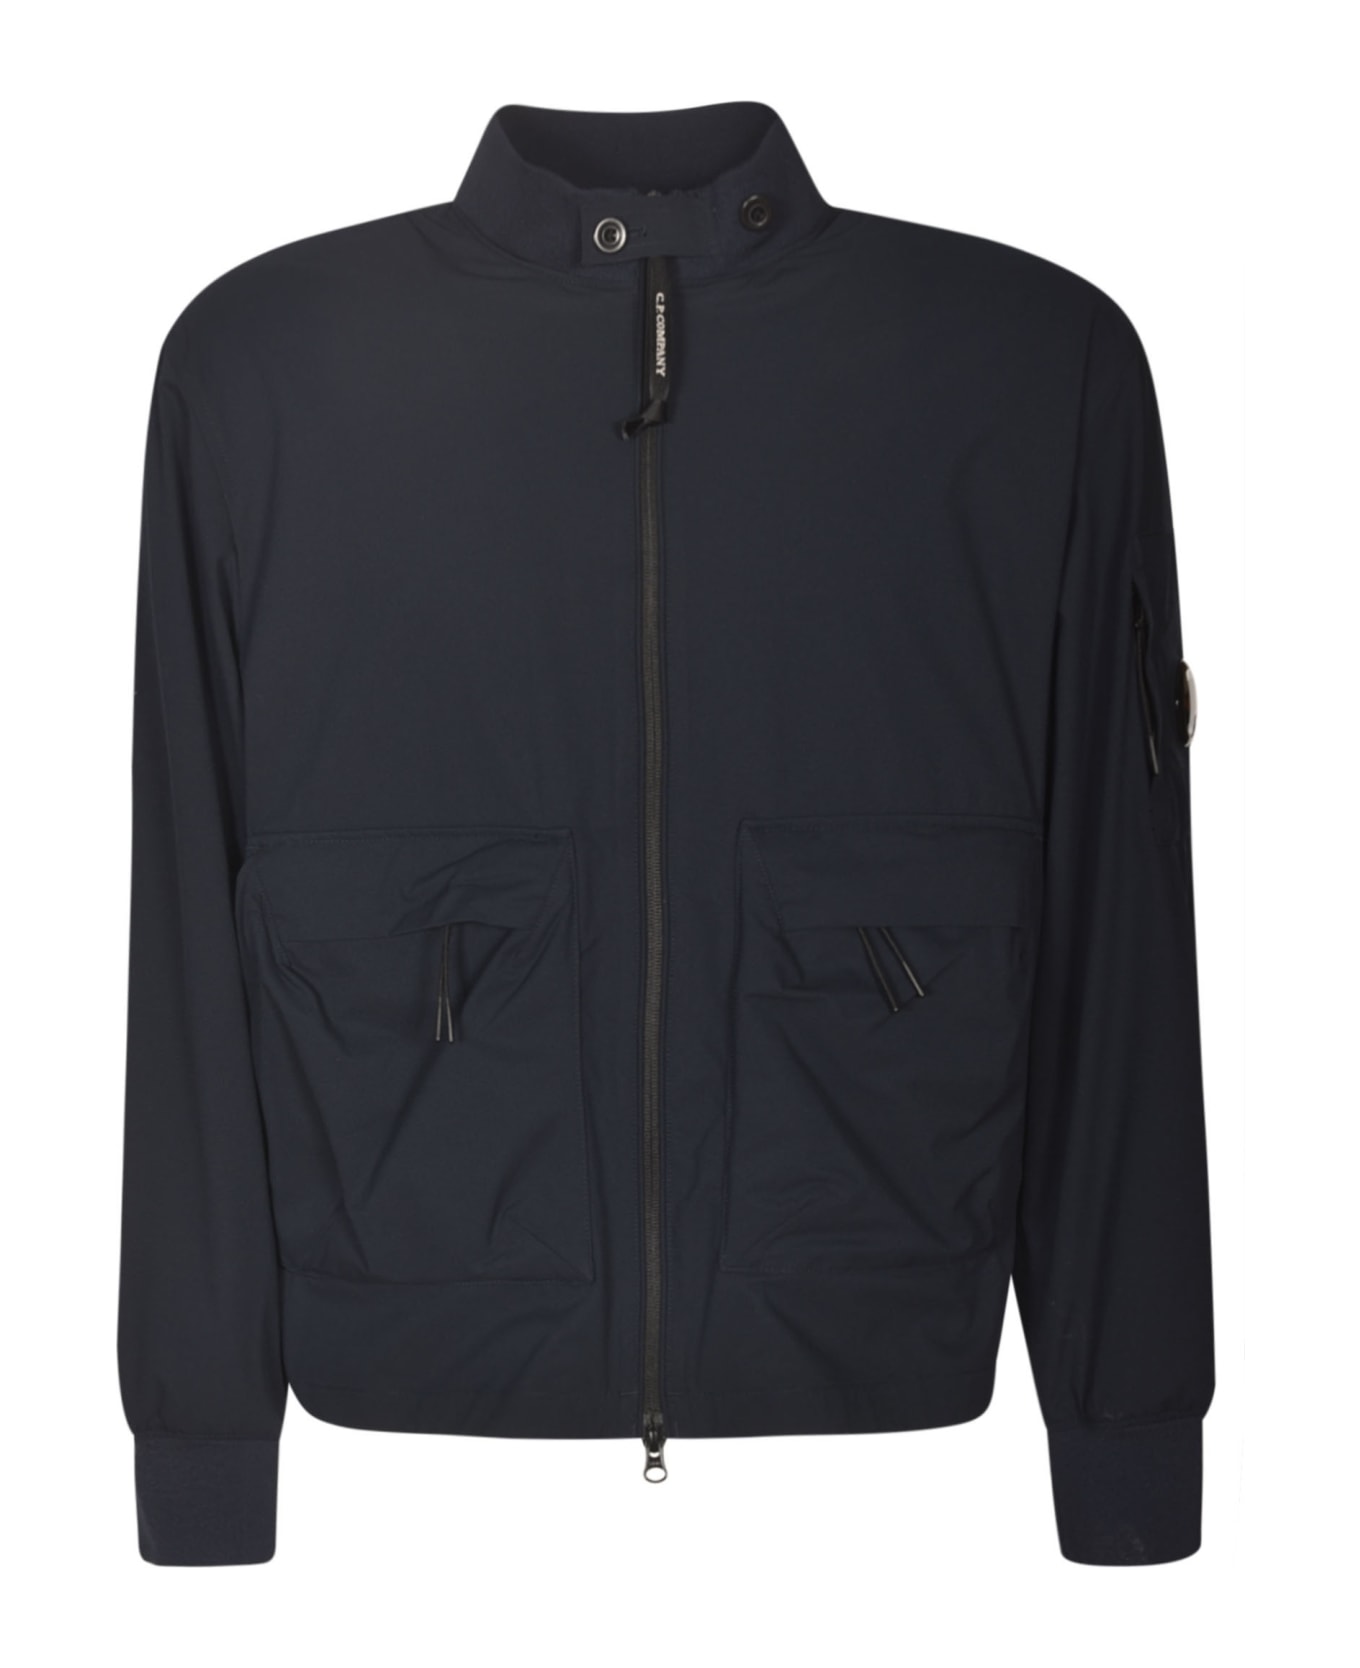 C.P. Company Cargo Zipped Jacket - Total eclipse